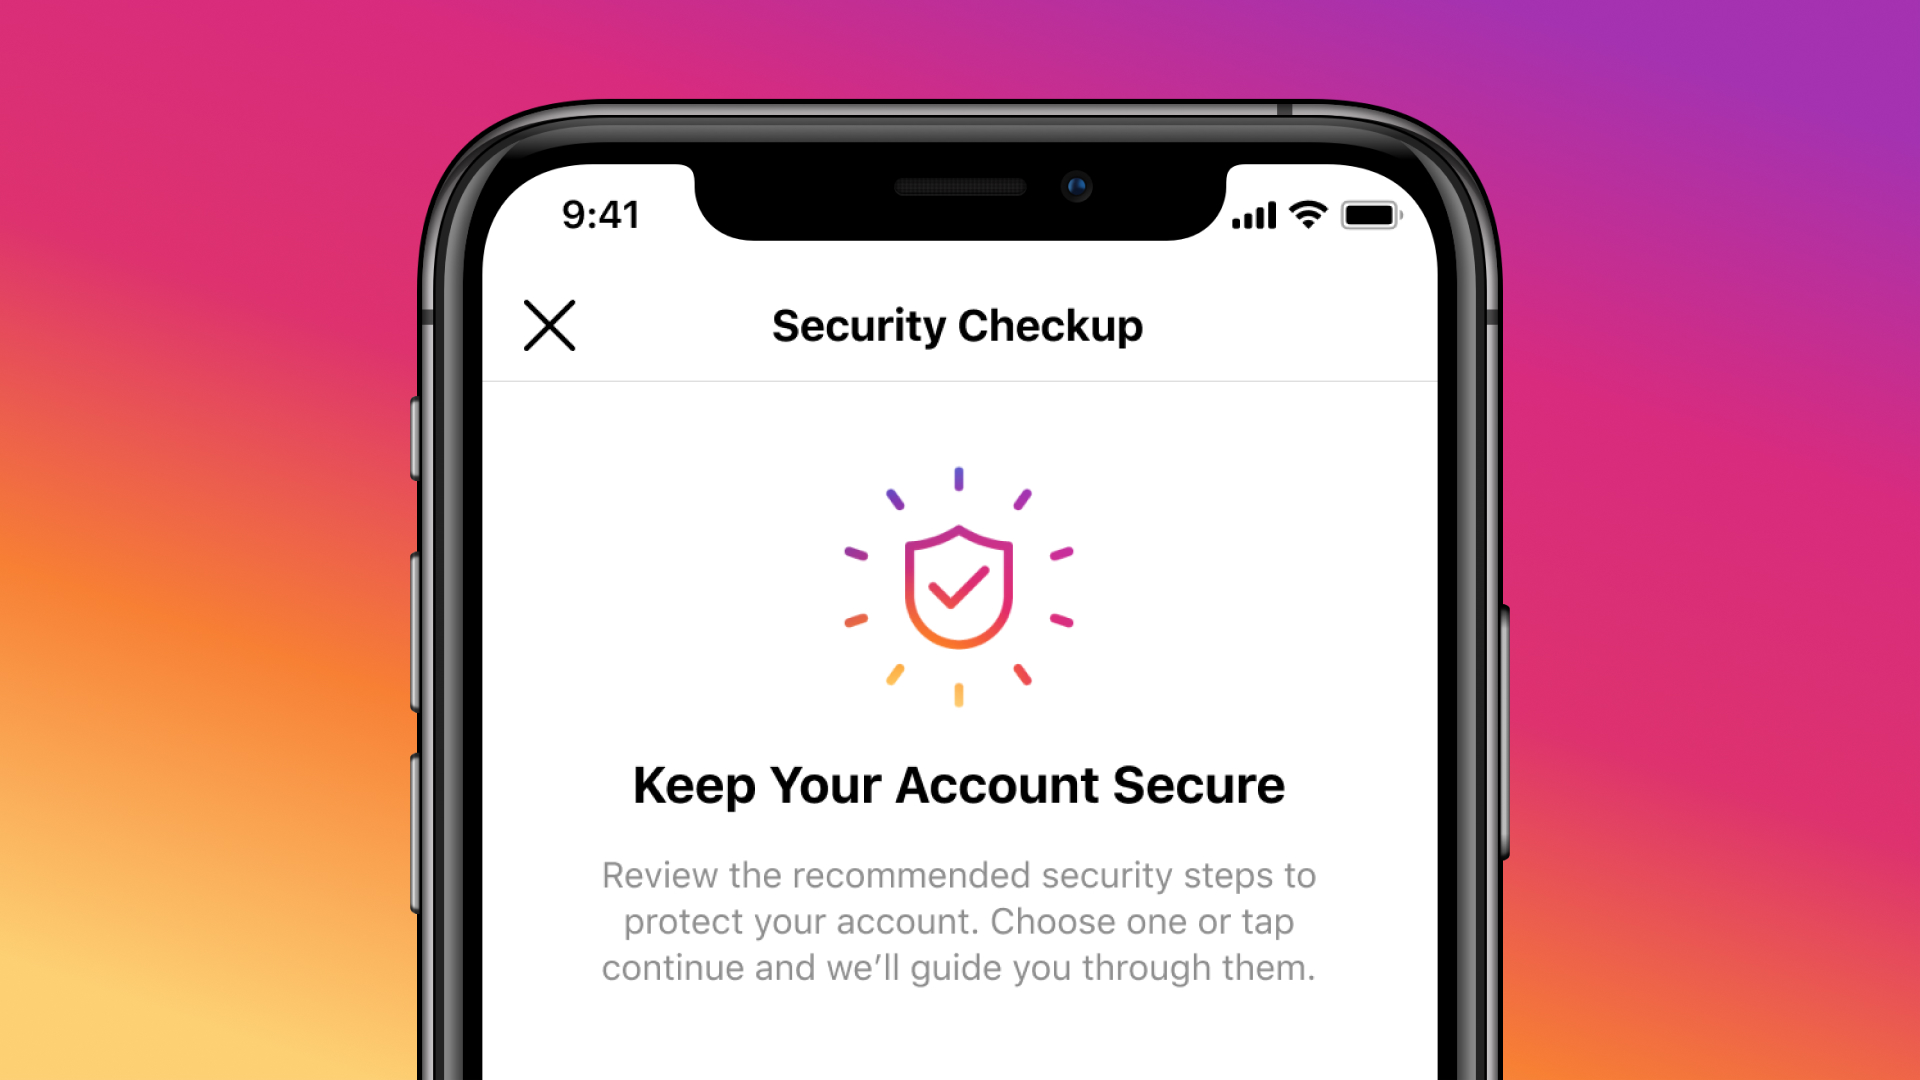  A screenshot of the Instagram security checkup page with a list of recommended security steps to protect your account.